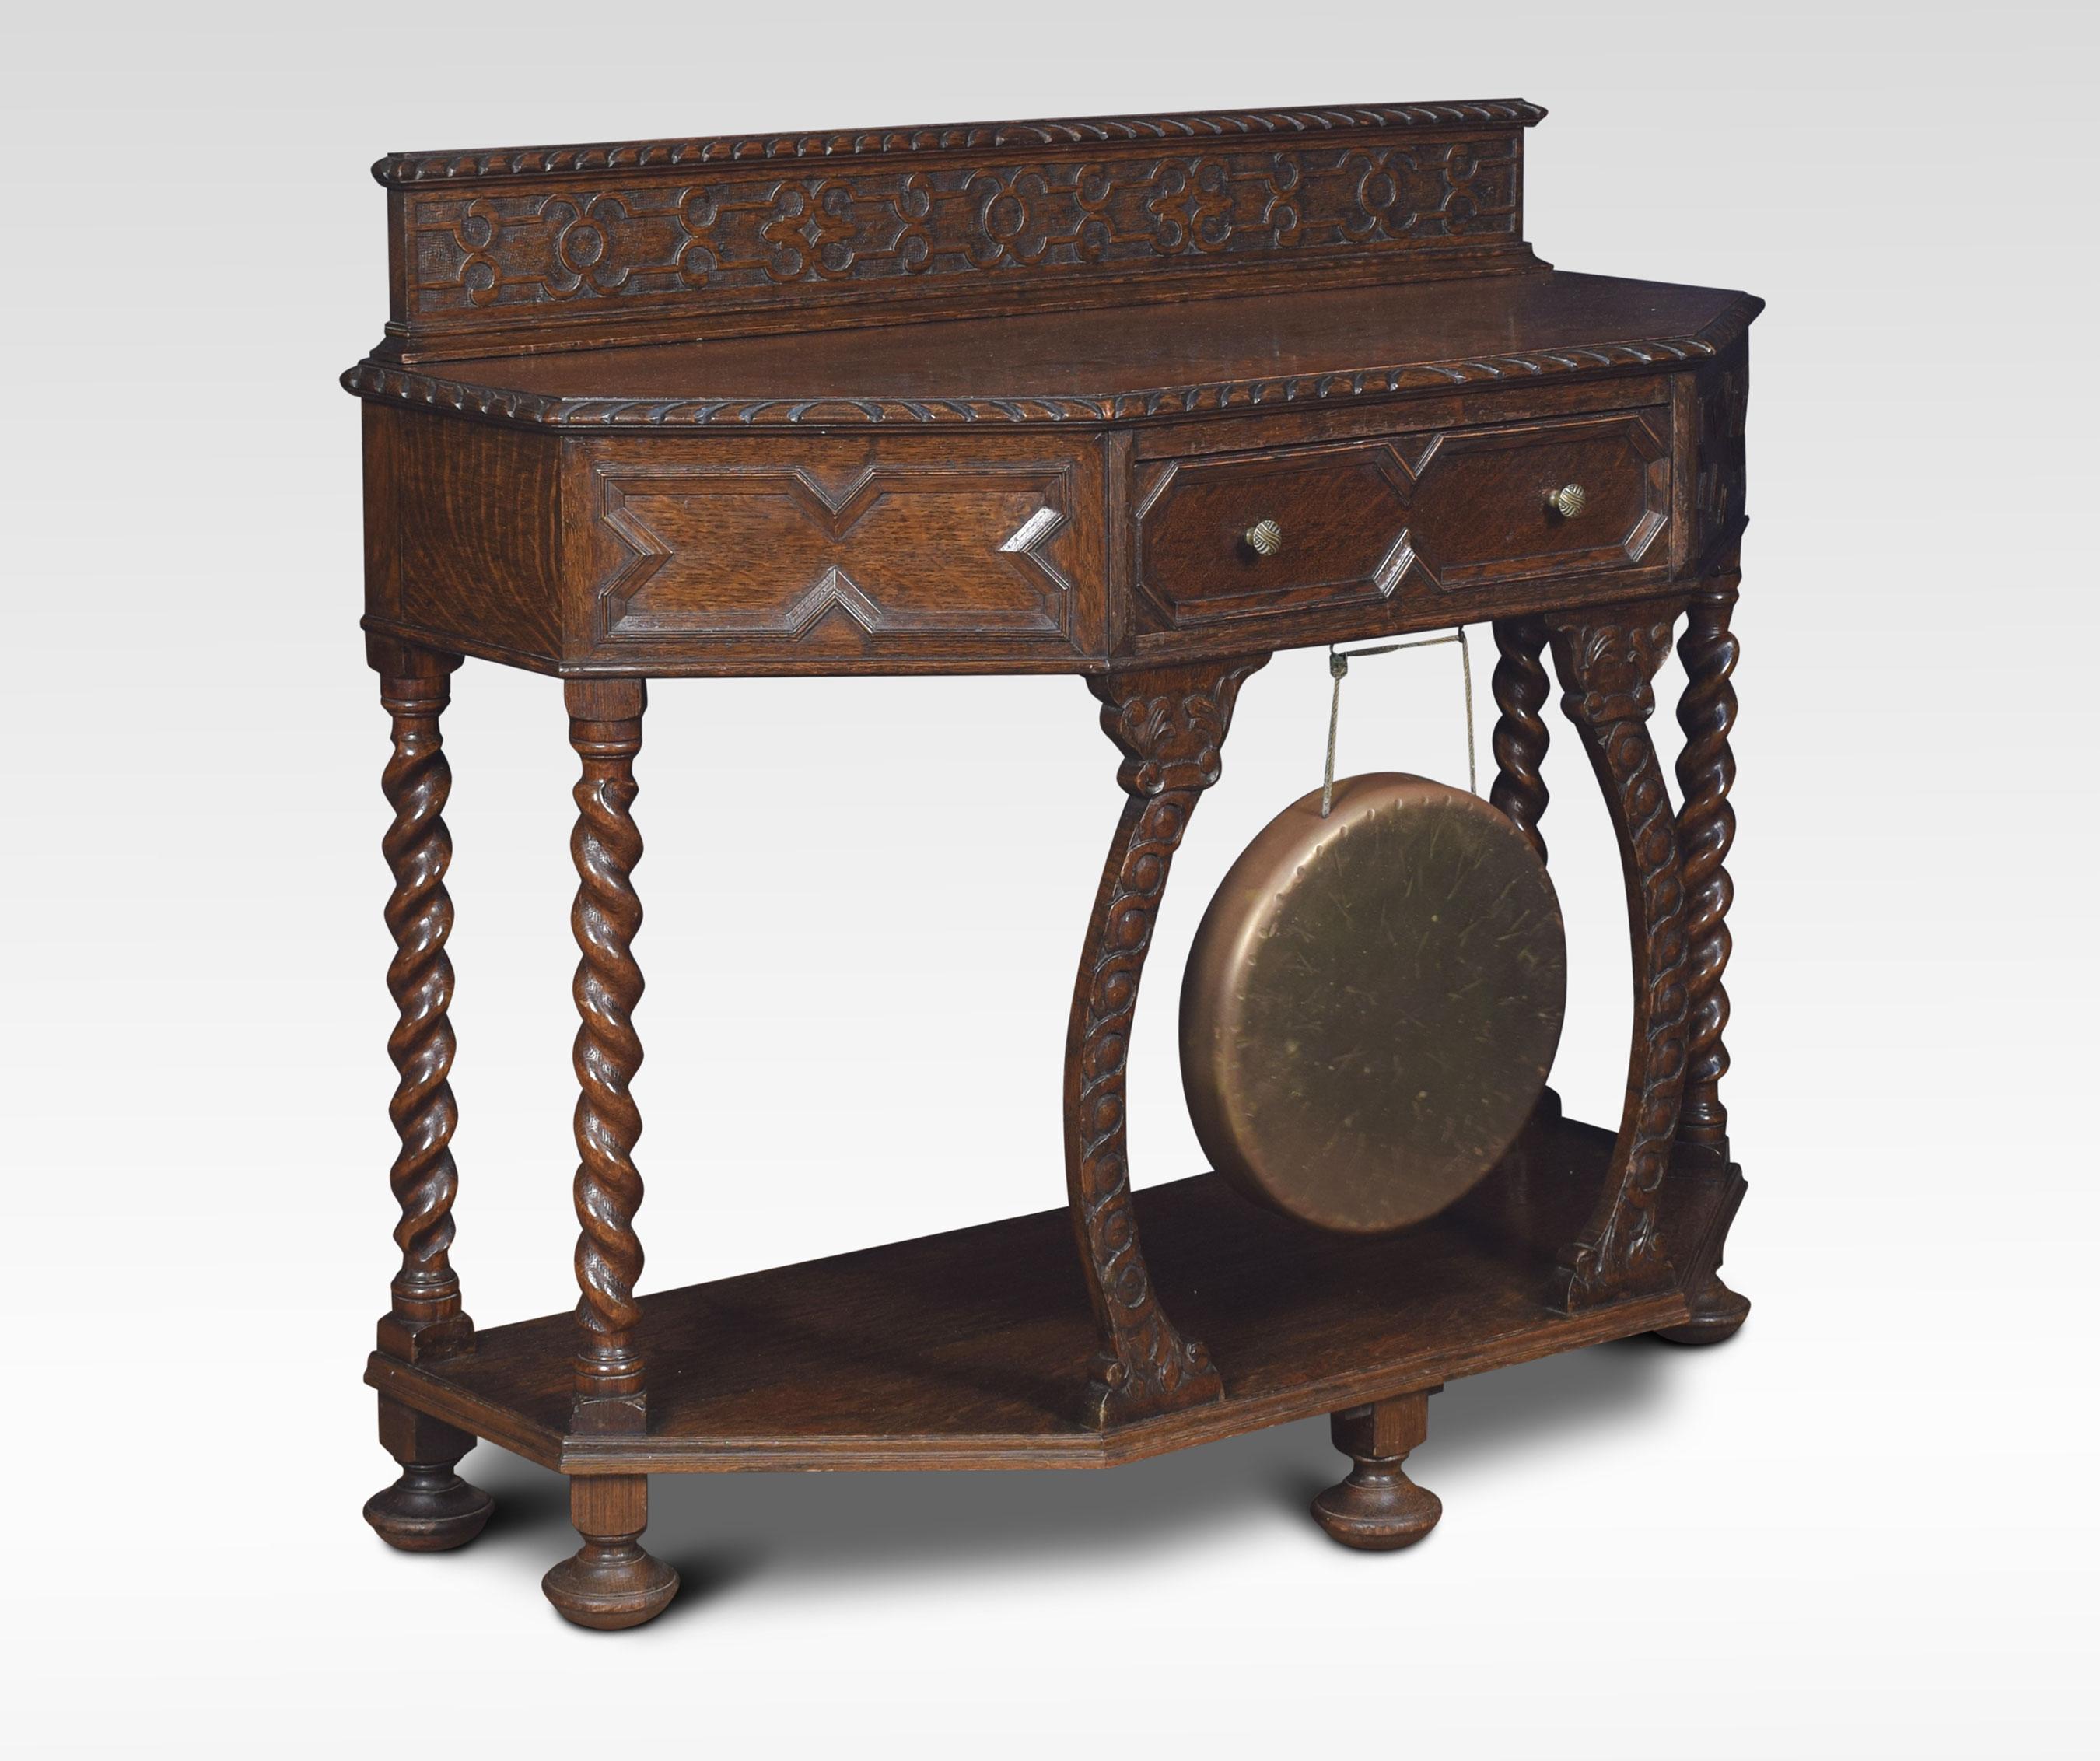 Carved oak hall table, the two of rectangular form with canted corners above a geometric moulded central drawer with brass gong below. Raised up on spiral turned supports united by under tier. All raised up on bun feet.
Dimensions:
Height 36.5